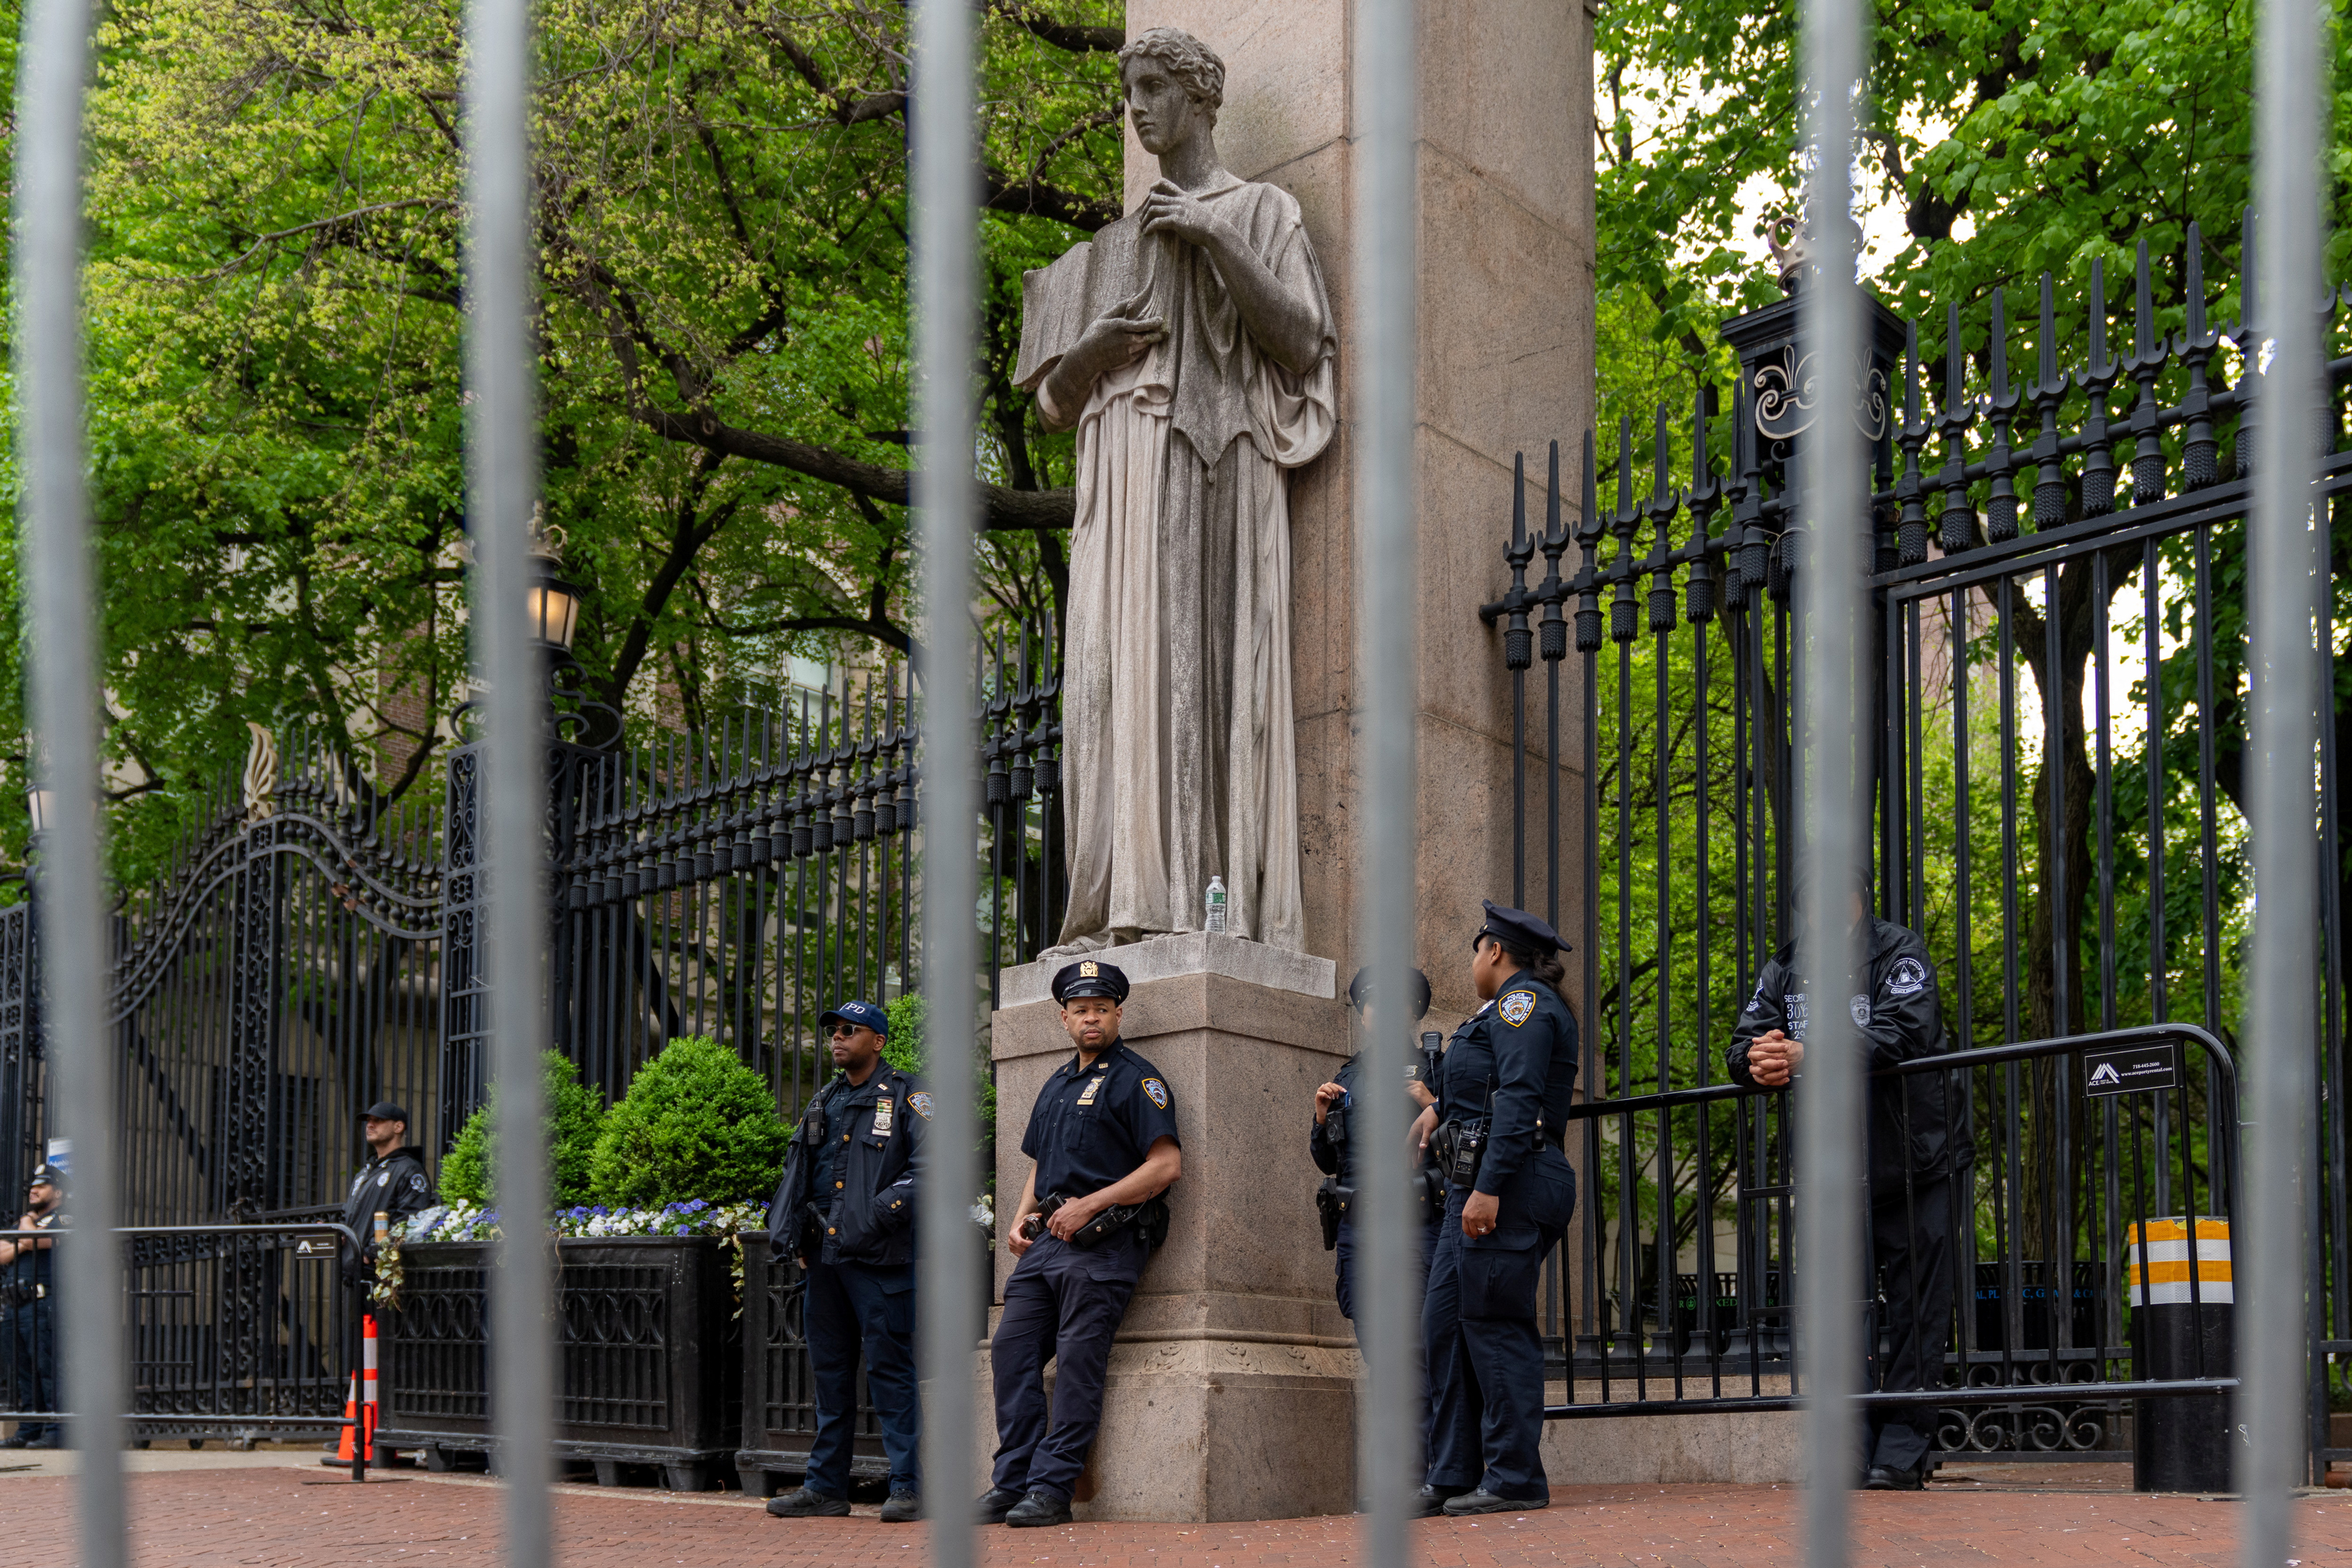 Private security and NYPD police officers stand guard at the gates of Columbia University in New York City, on May 2.